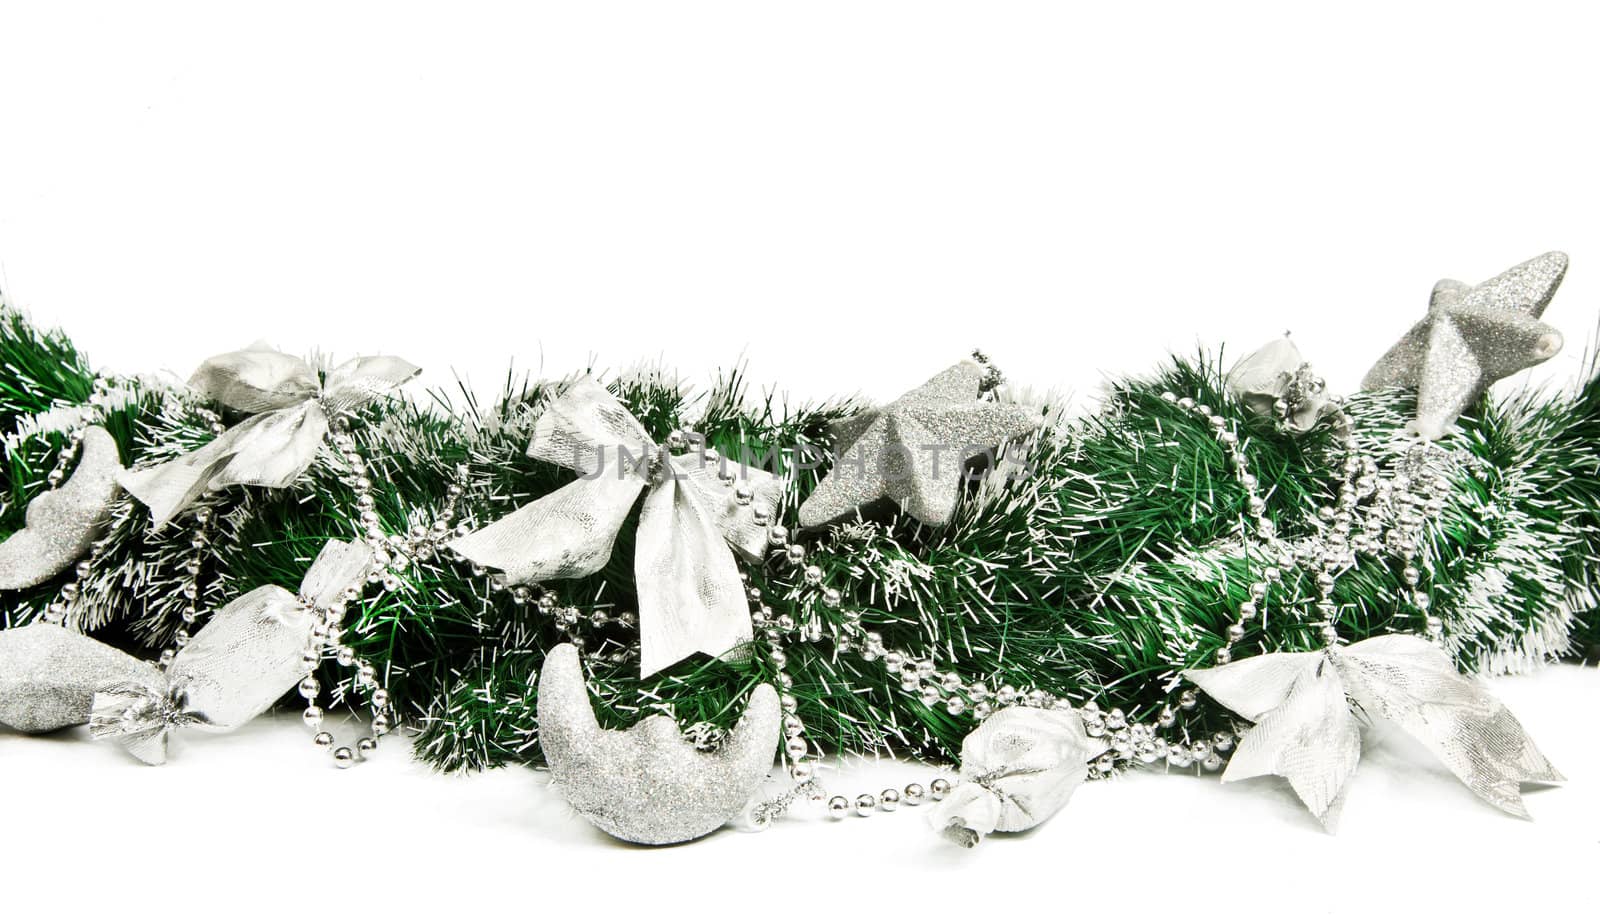 Part of Christmas wreath with decorations isolated on white